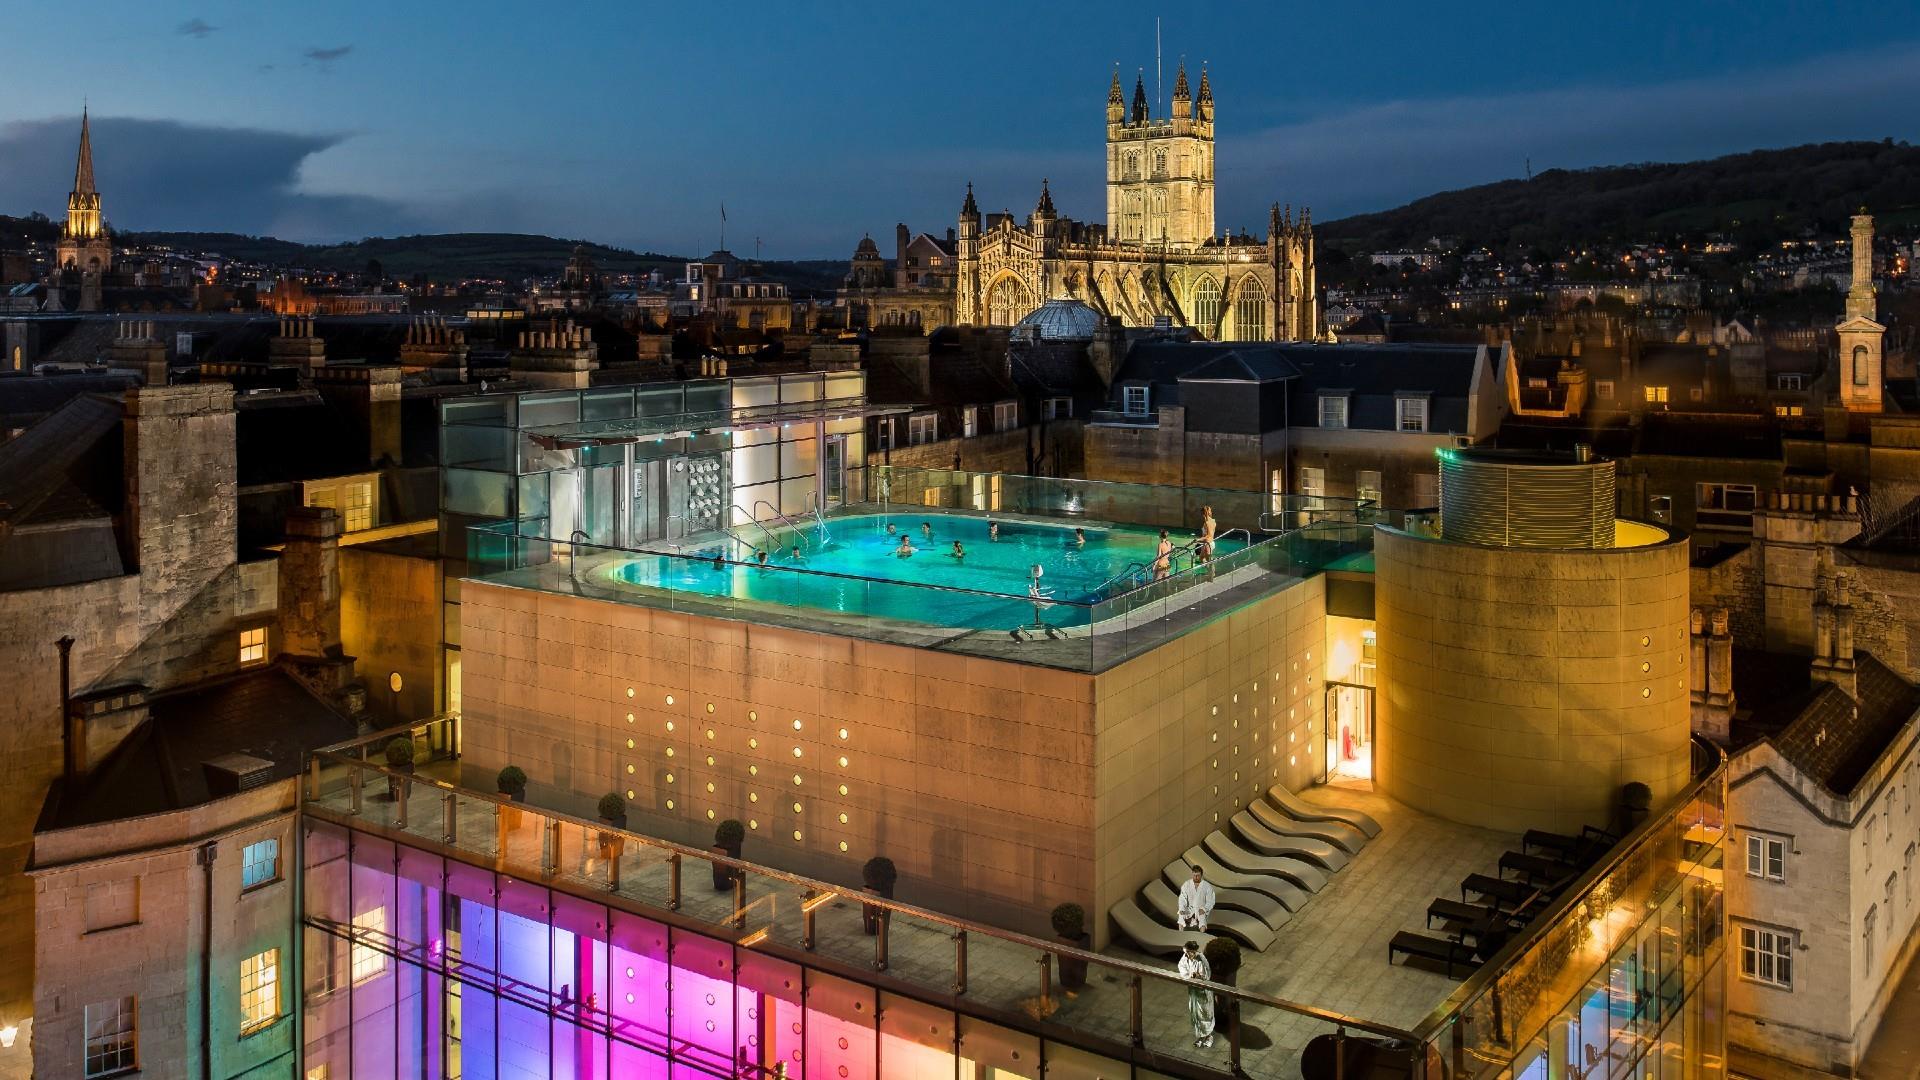 Thermae Bath Spa rooftop pool and Bath's city skyline at night